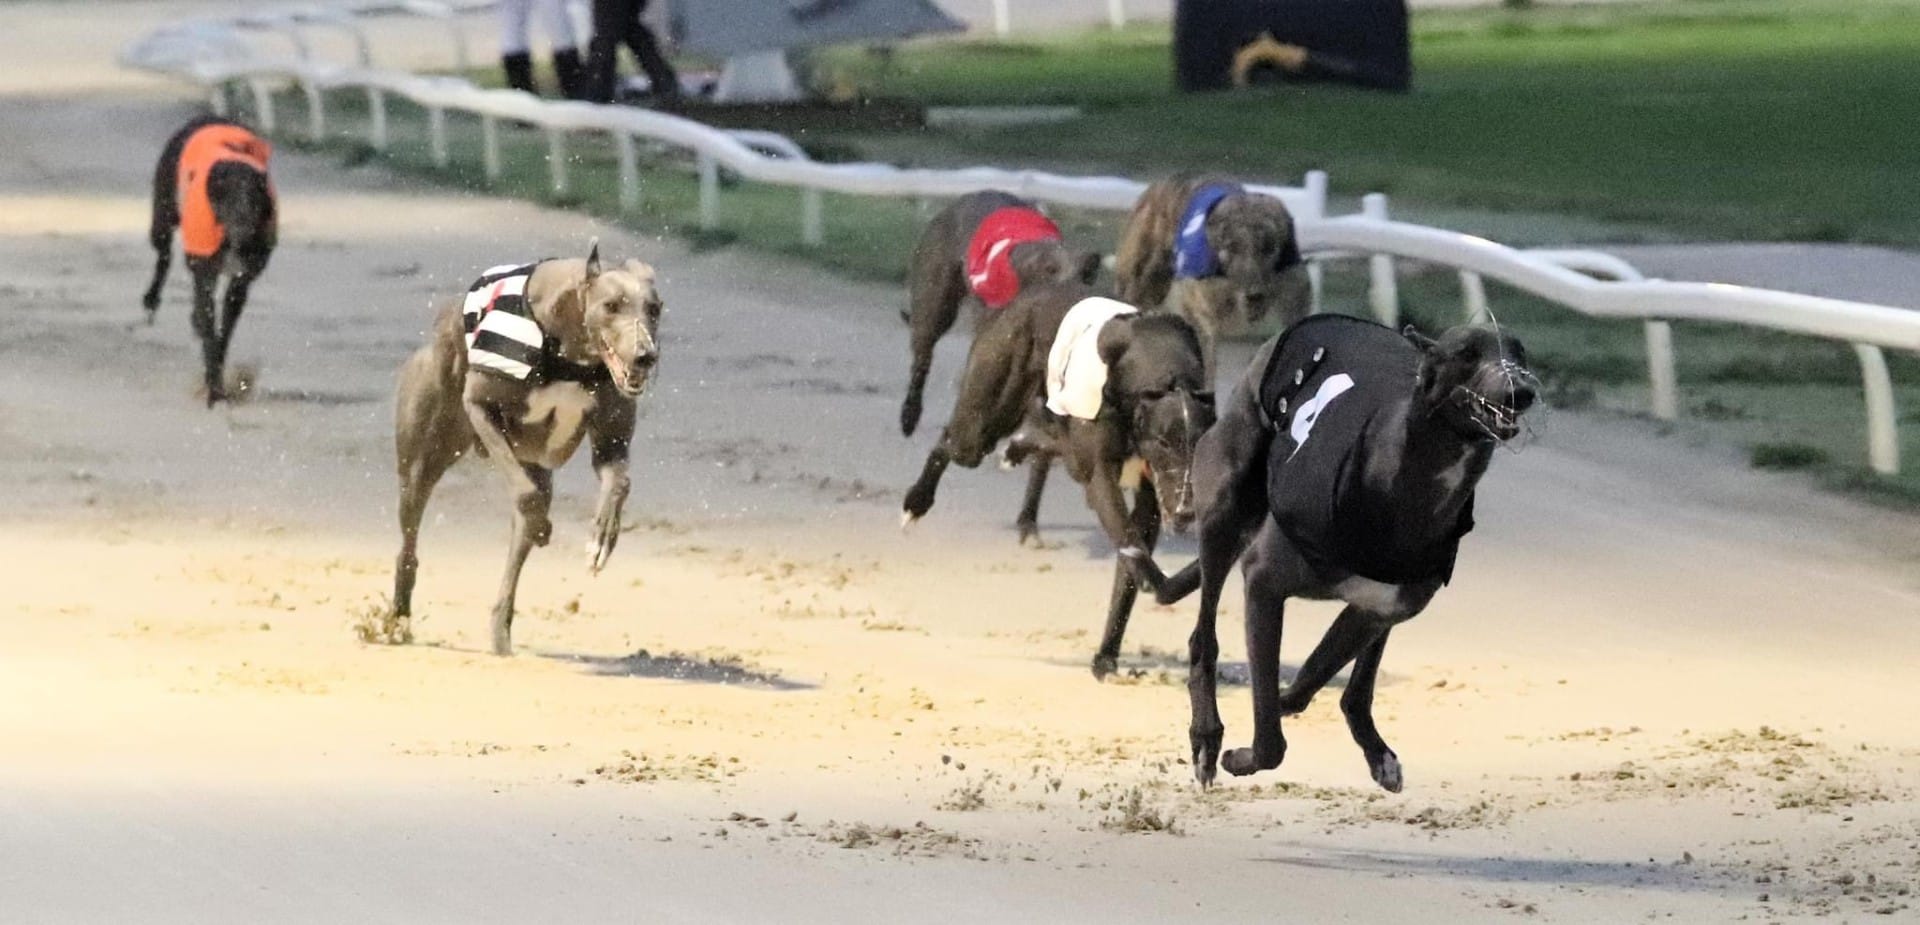 Friday's 2nd round Derby heats - replays, head-ons and reaction